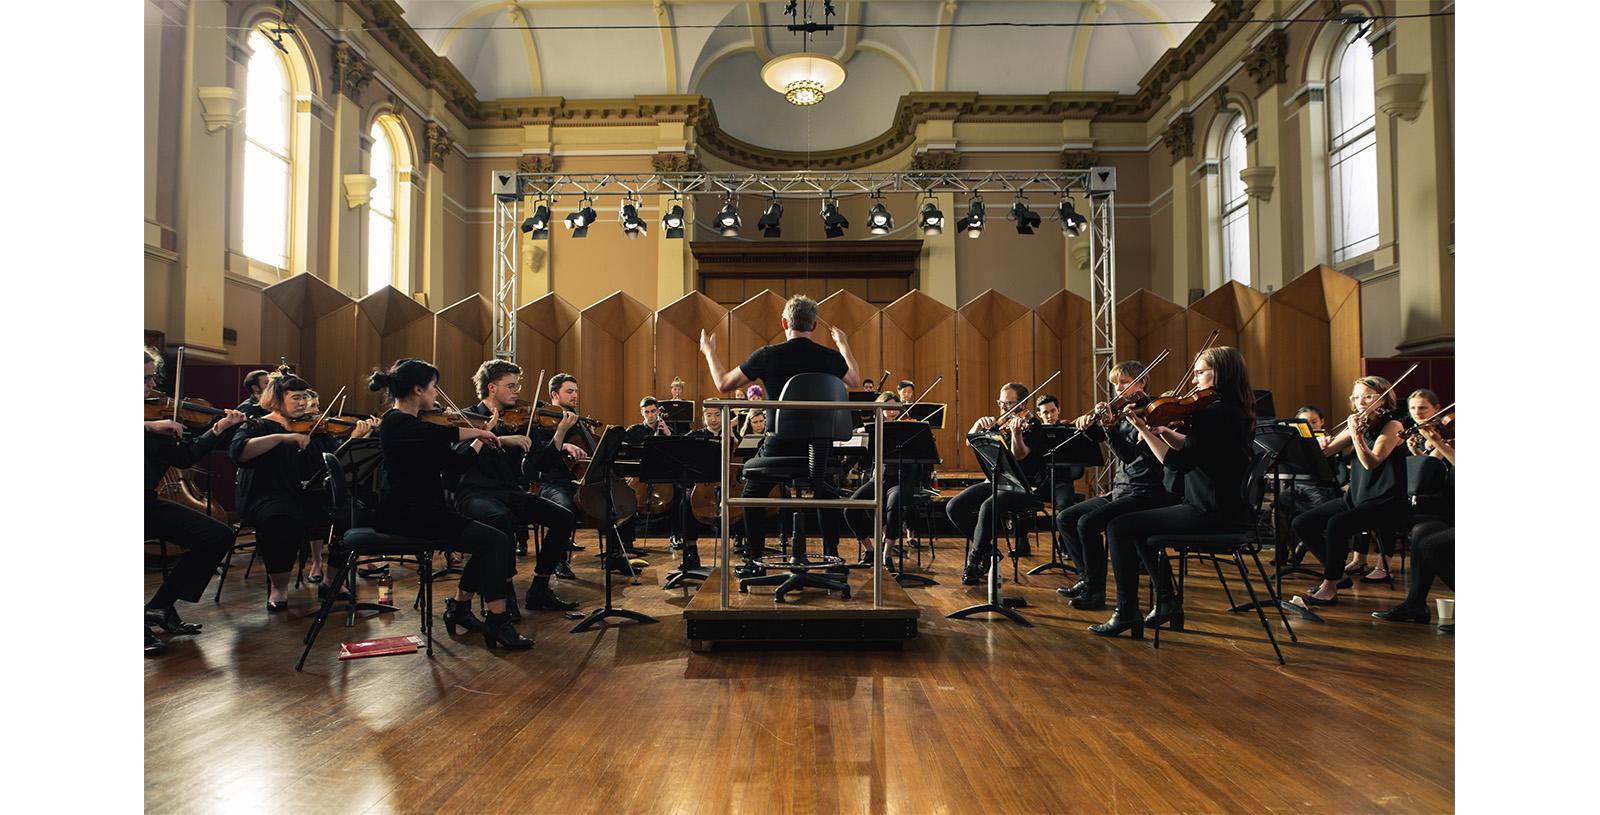 2018 Rehearsal at South Melbourne Town Hall - Photo by Cameron Jamieson